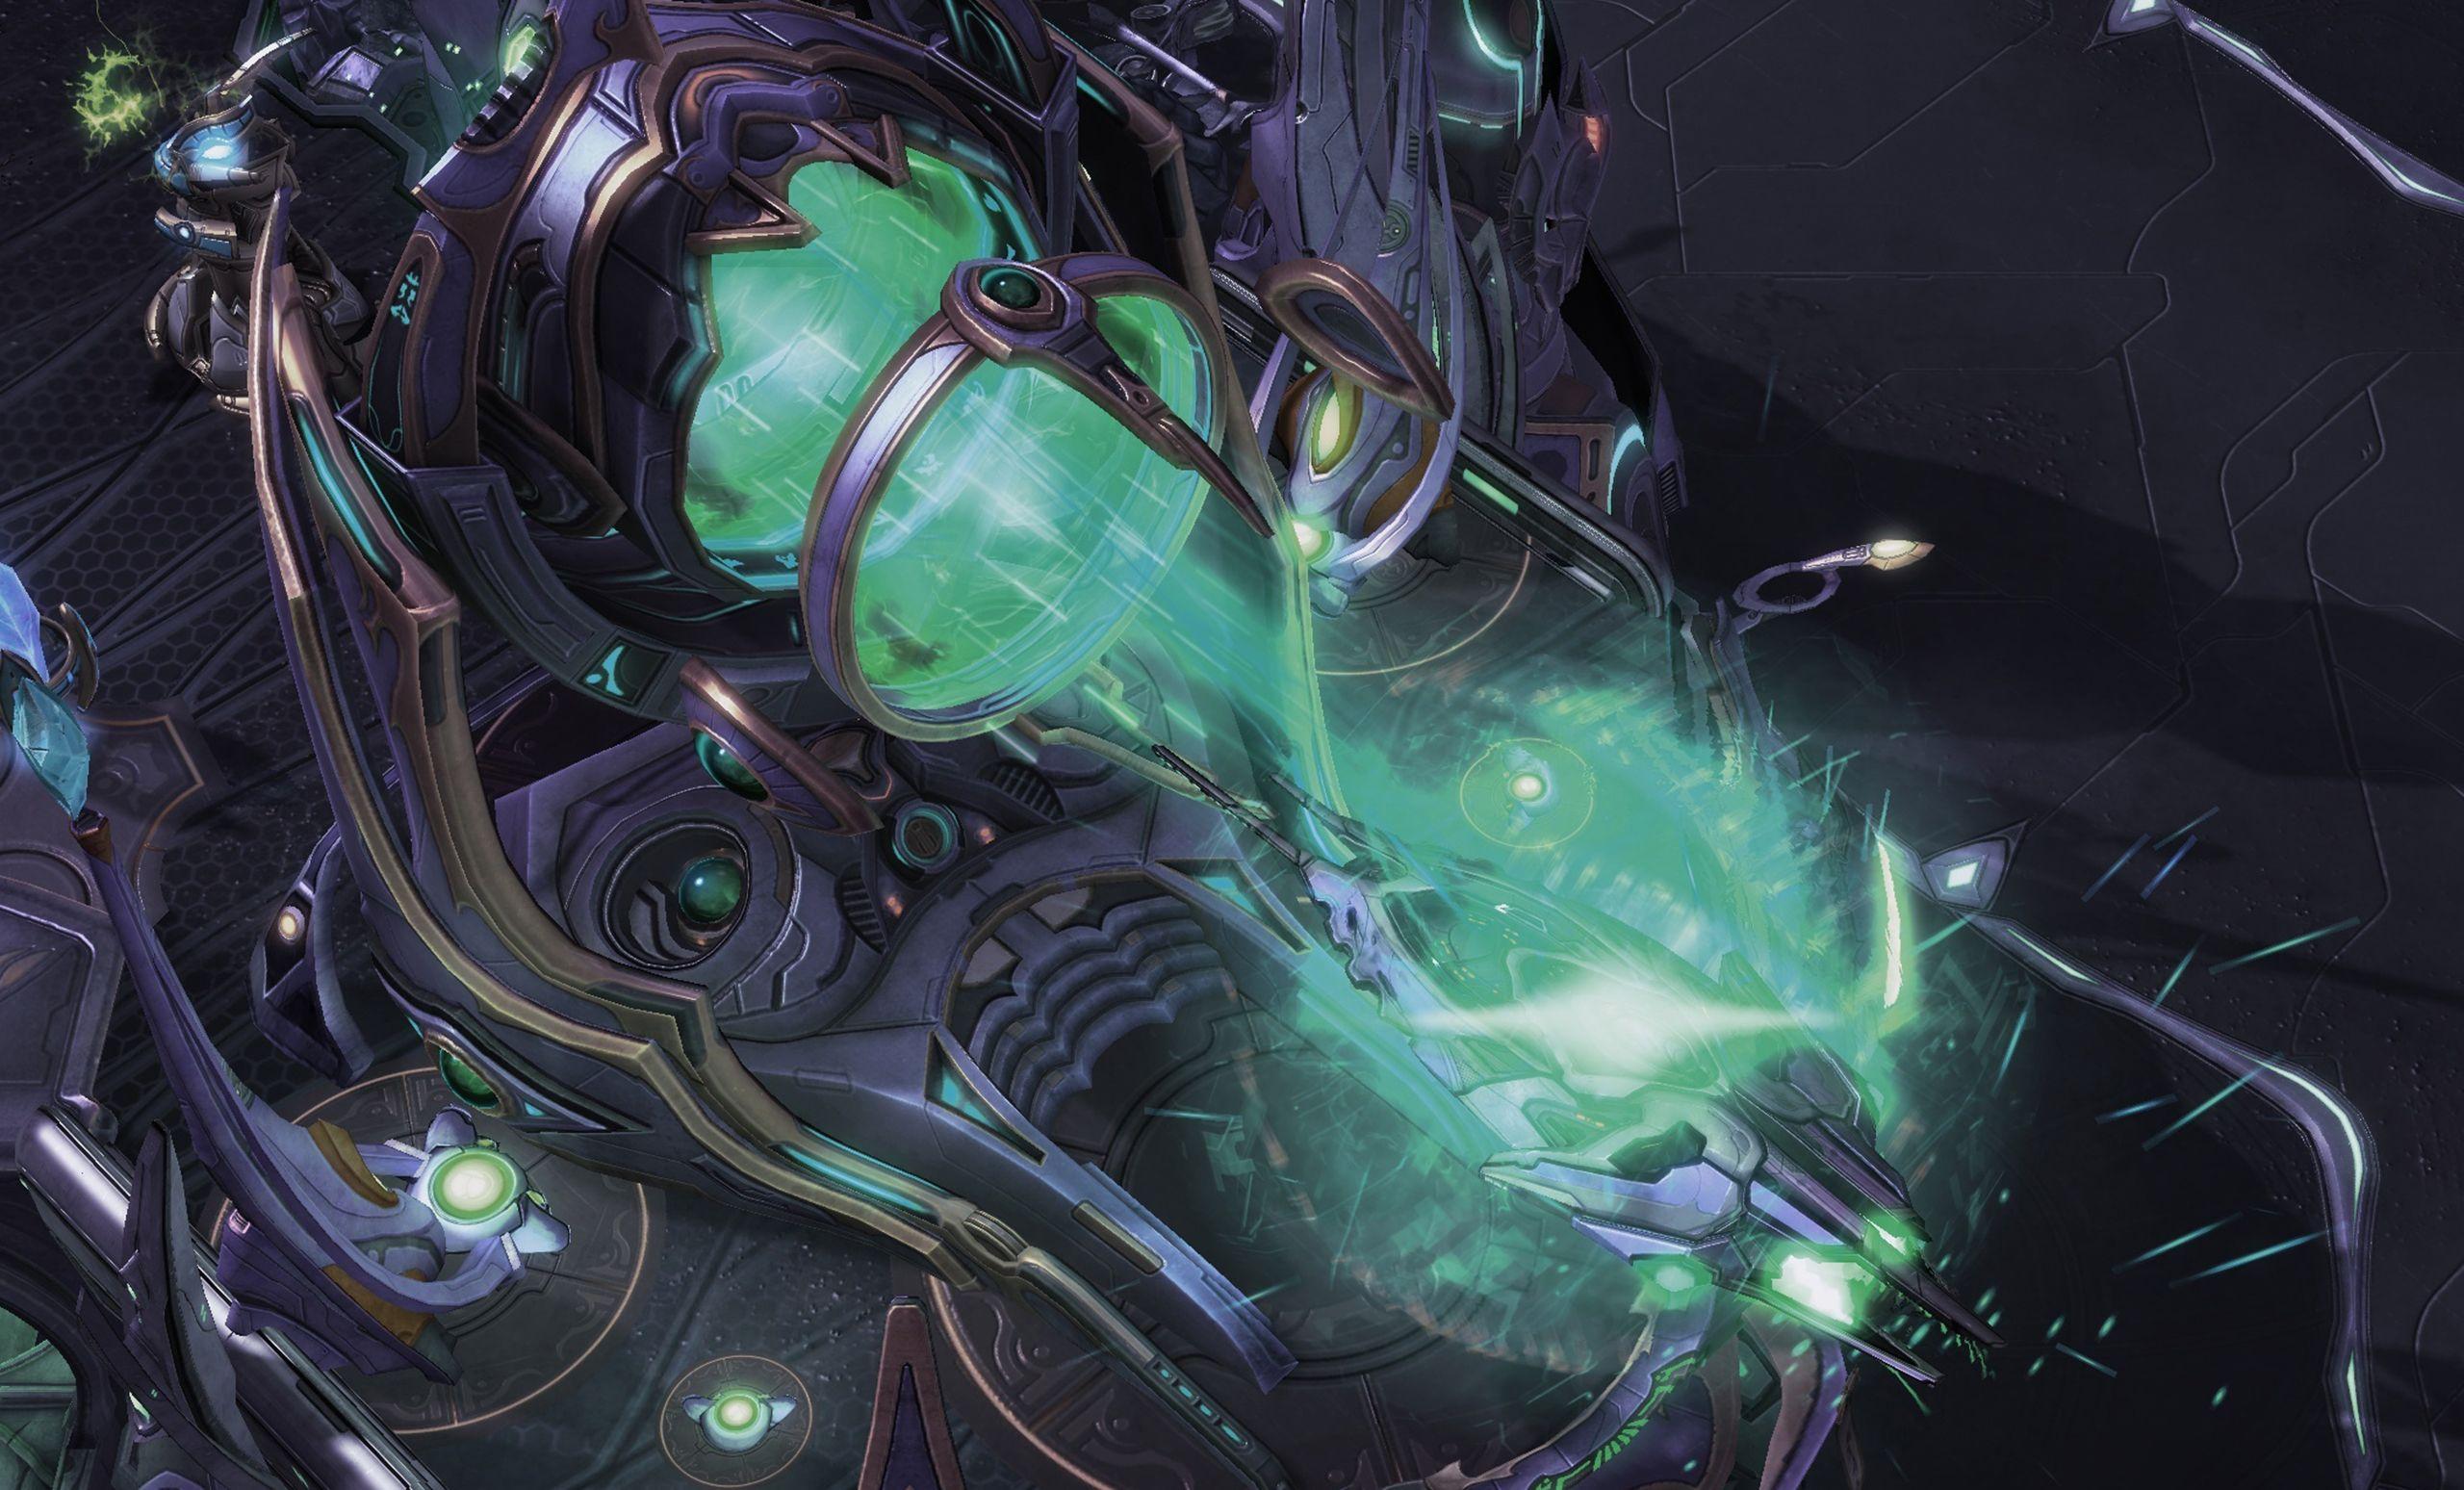 Starcraft II: Legacy of the Void officially revealed at Blizzcon